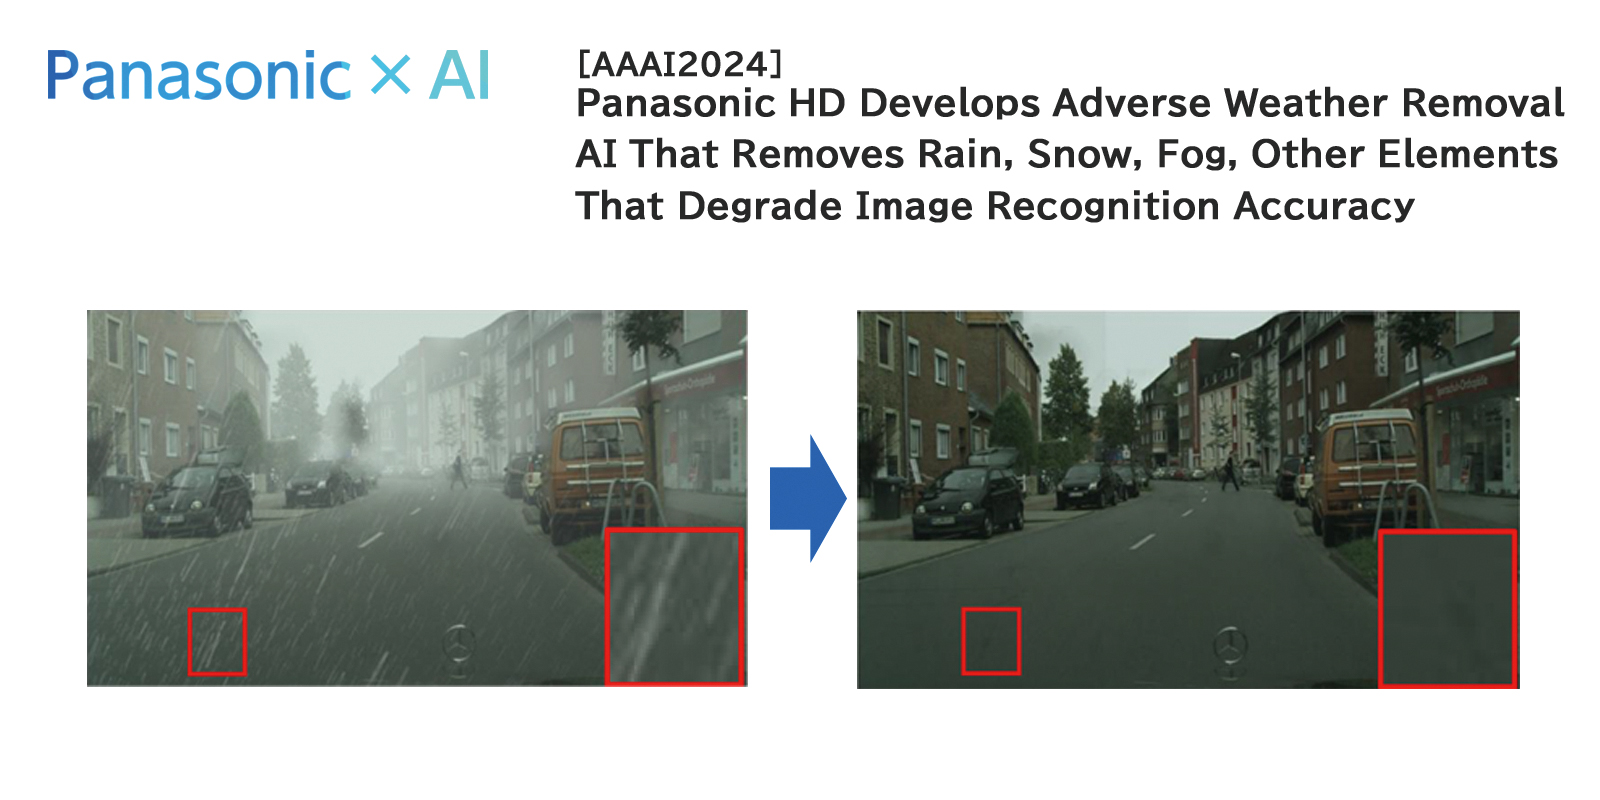 image: Panasonic × AI [AAAI2024] Panasonic HD Develops Adverse Weather Removal AI That Removes Rain, Snow, Fog, Other Elements That Degrade Image Recognition Accuracy